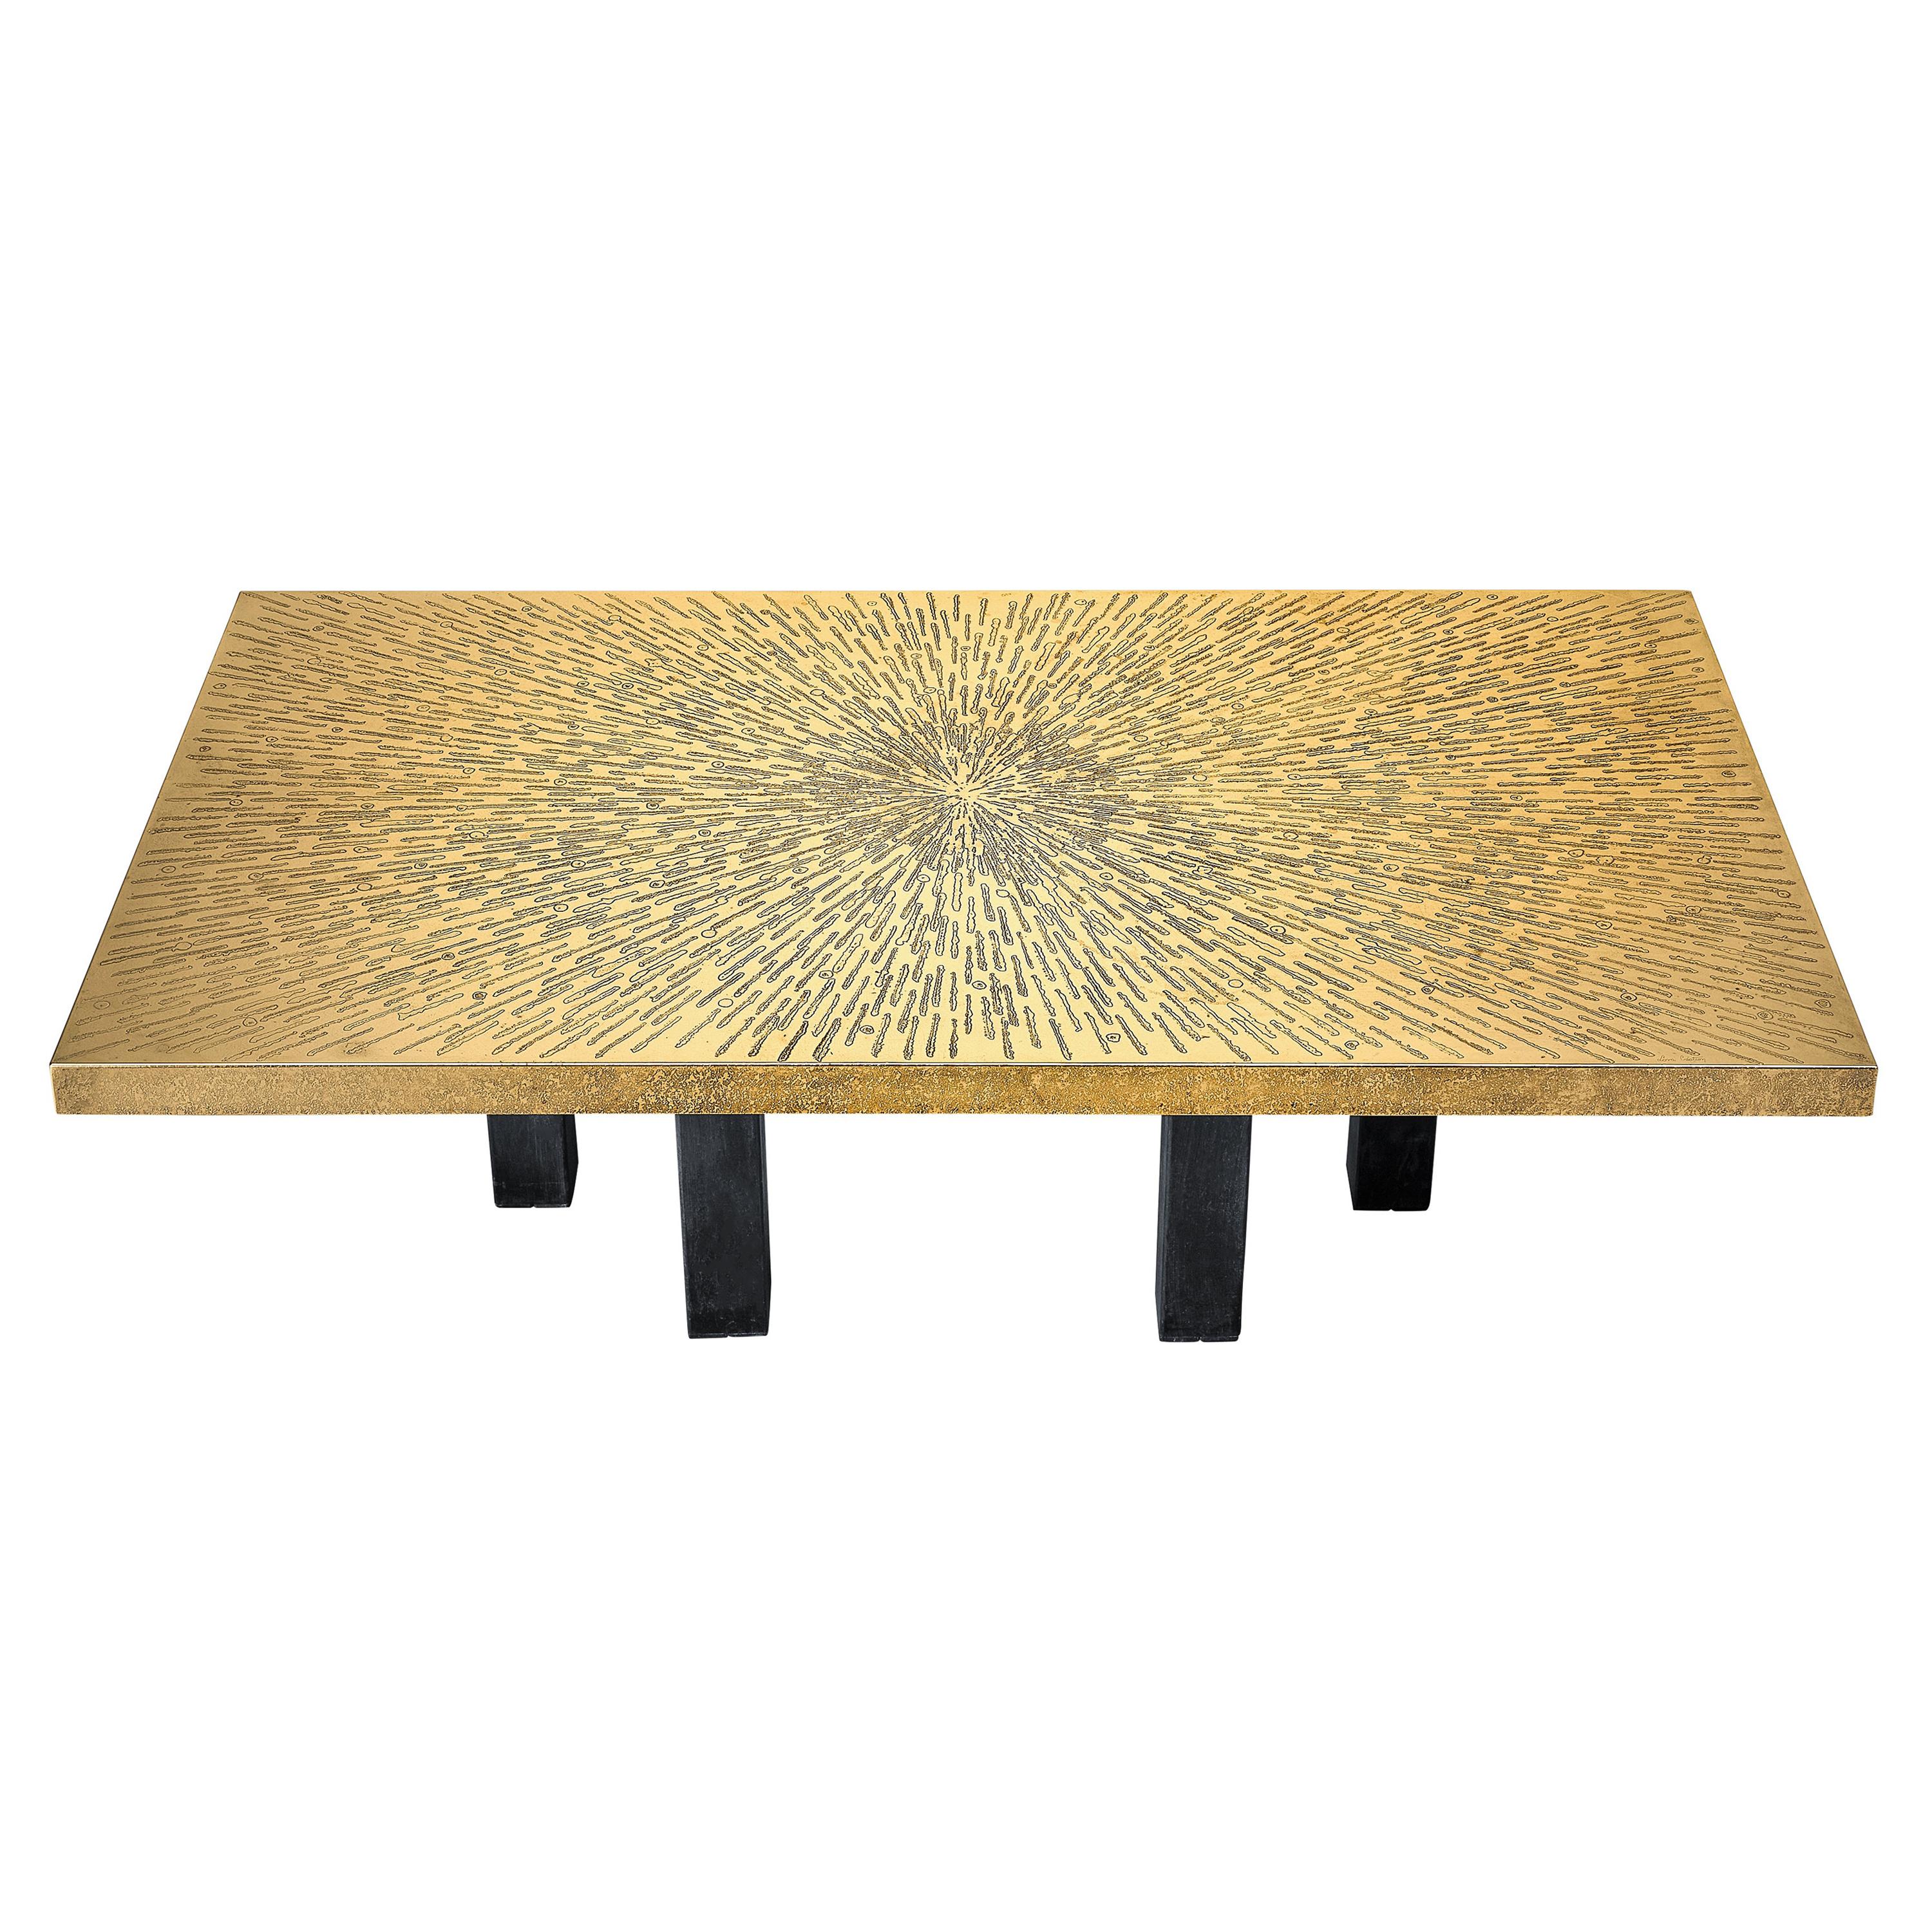 Lova Creation Etched Brass Coffee Table